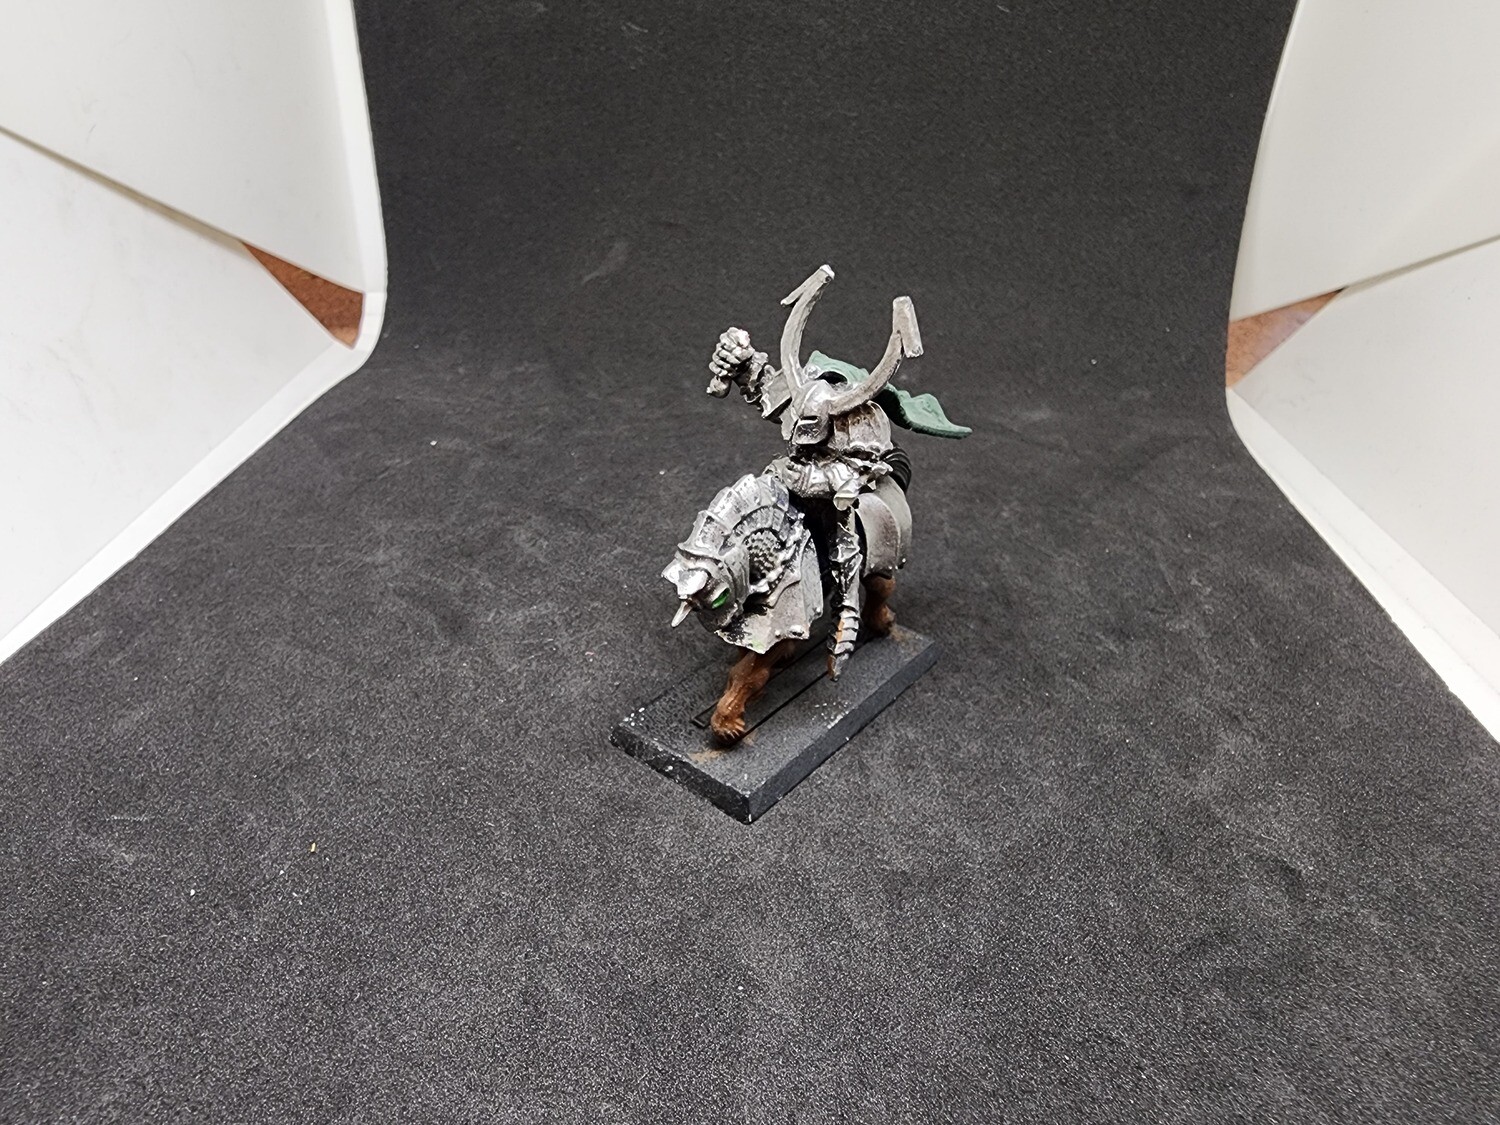 Used Warhammer Mounted Model #7 (AoS/Old World)